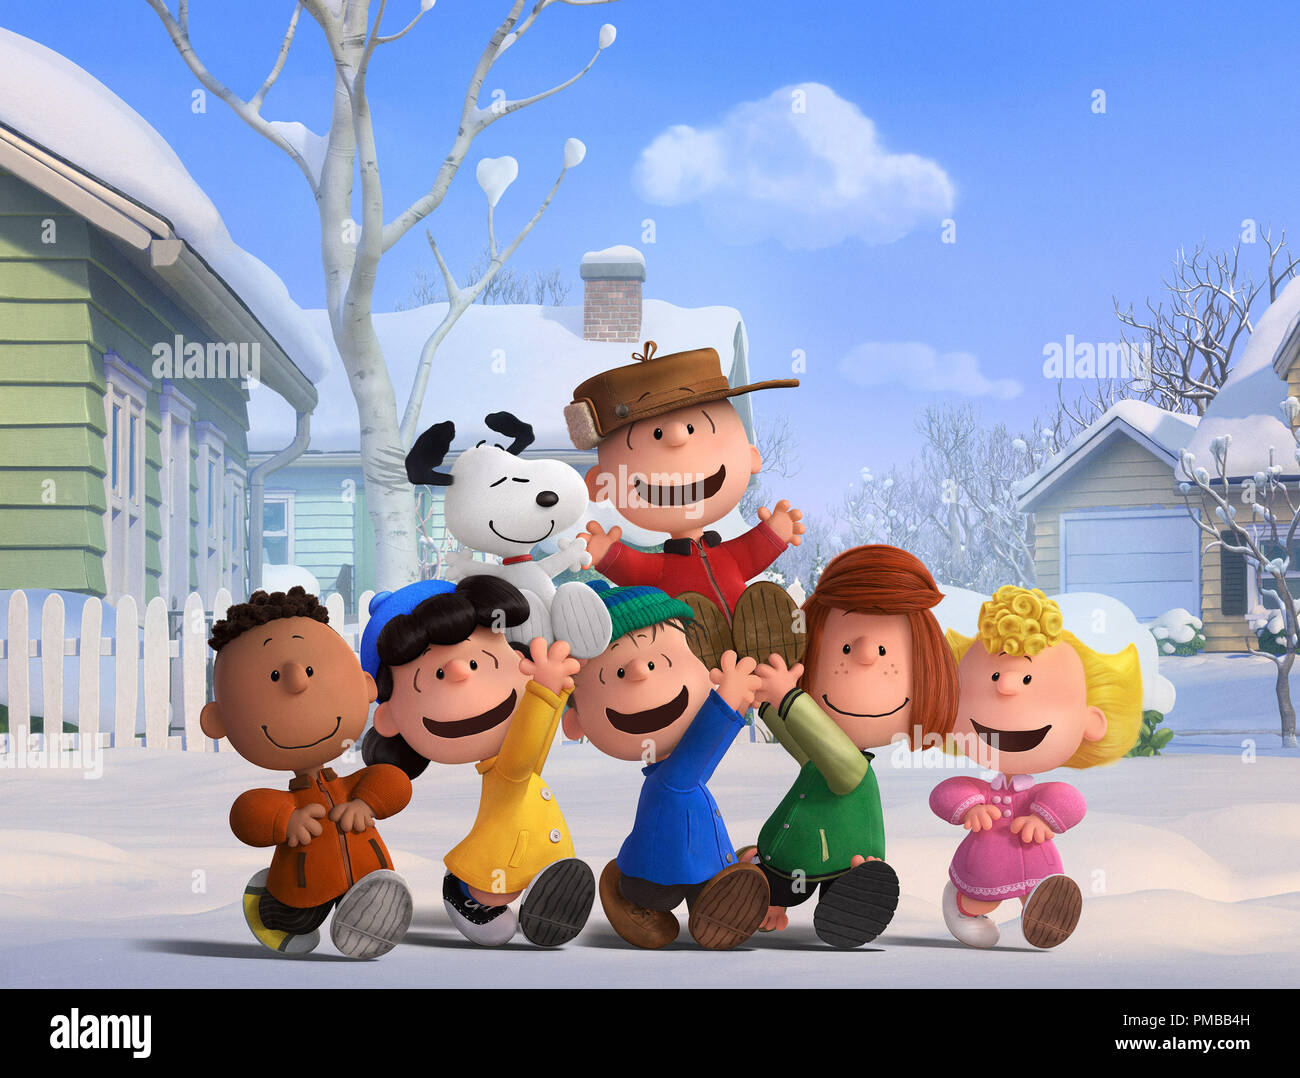 https://c8.alamy.com/comp/PMBB4H/charlie-brown-snoopy-and-the-peanuts-gang-franklin-lucy-linus-peppermint-patty-and-sally-revel-in-a-snow-day-in-the-peanuts-movie-2015-20th-century-fox-PMBB4H.jpg